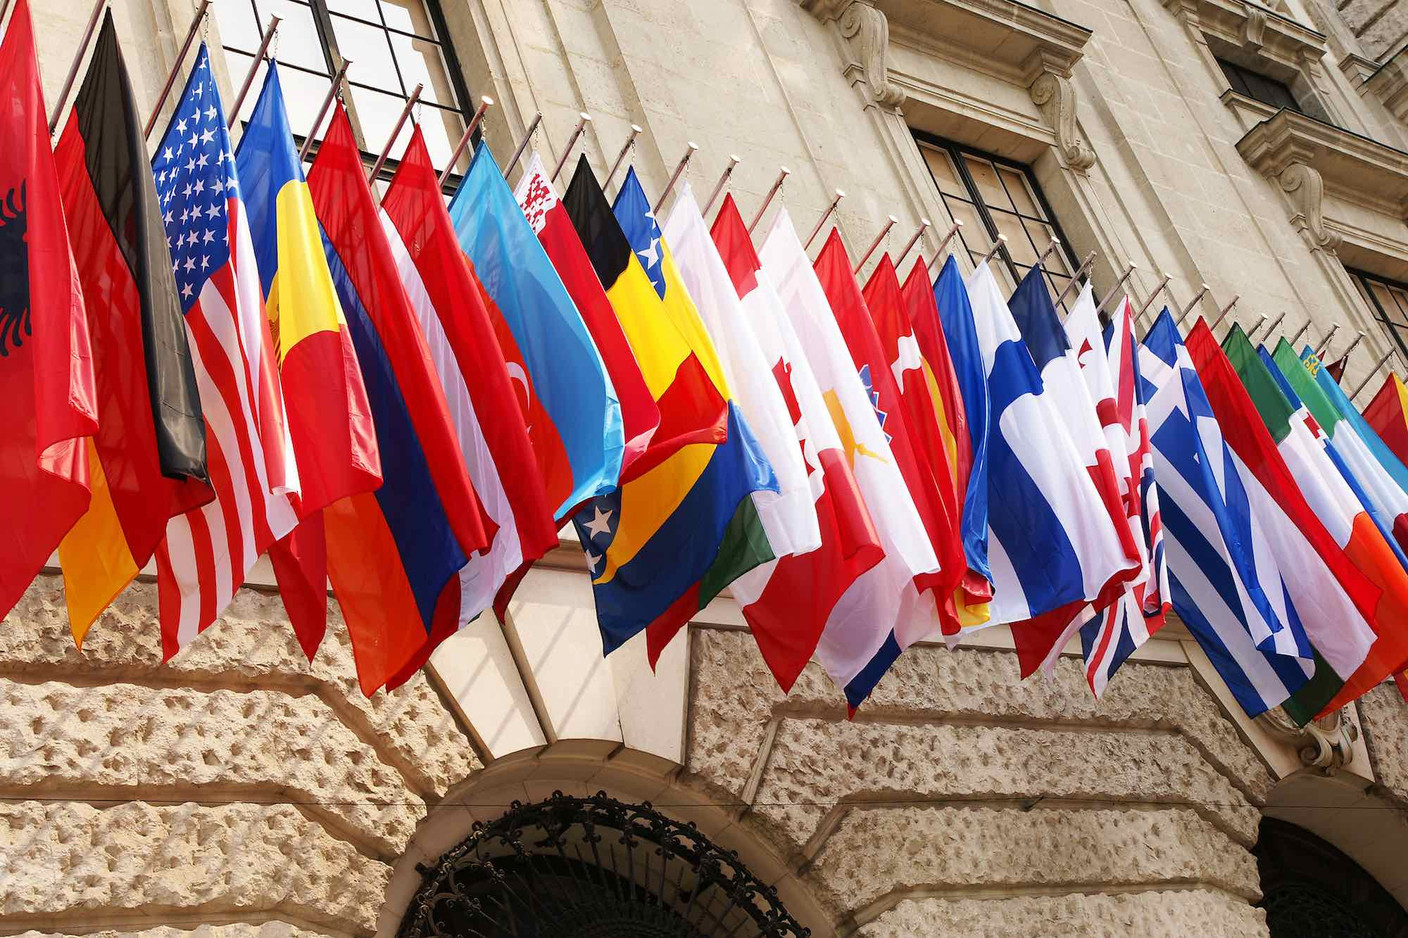 The Organisation for Economic Co-operation and Development stated that single Luxembourg workers paid tax rates that were more than double of those for married couples in 2021. Pictured: Flags of OECD members. Photo credit: Shutterstock/Johanna Muehlbauer